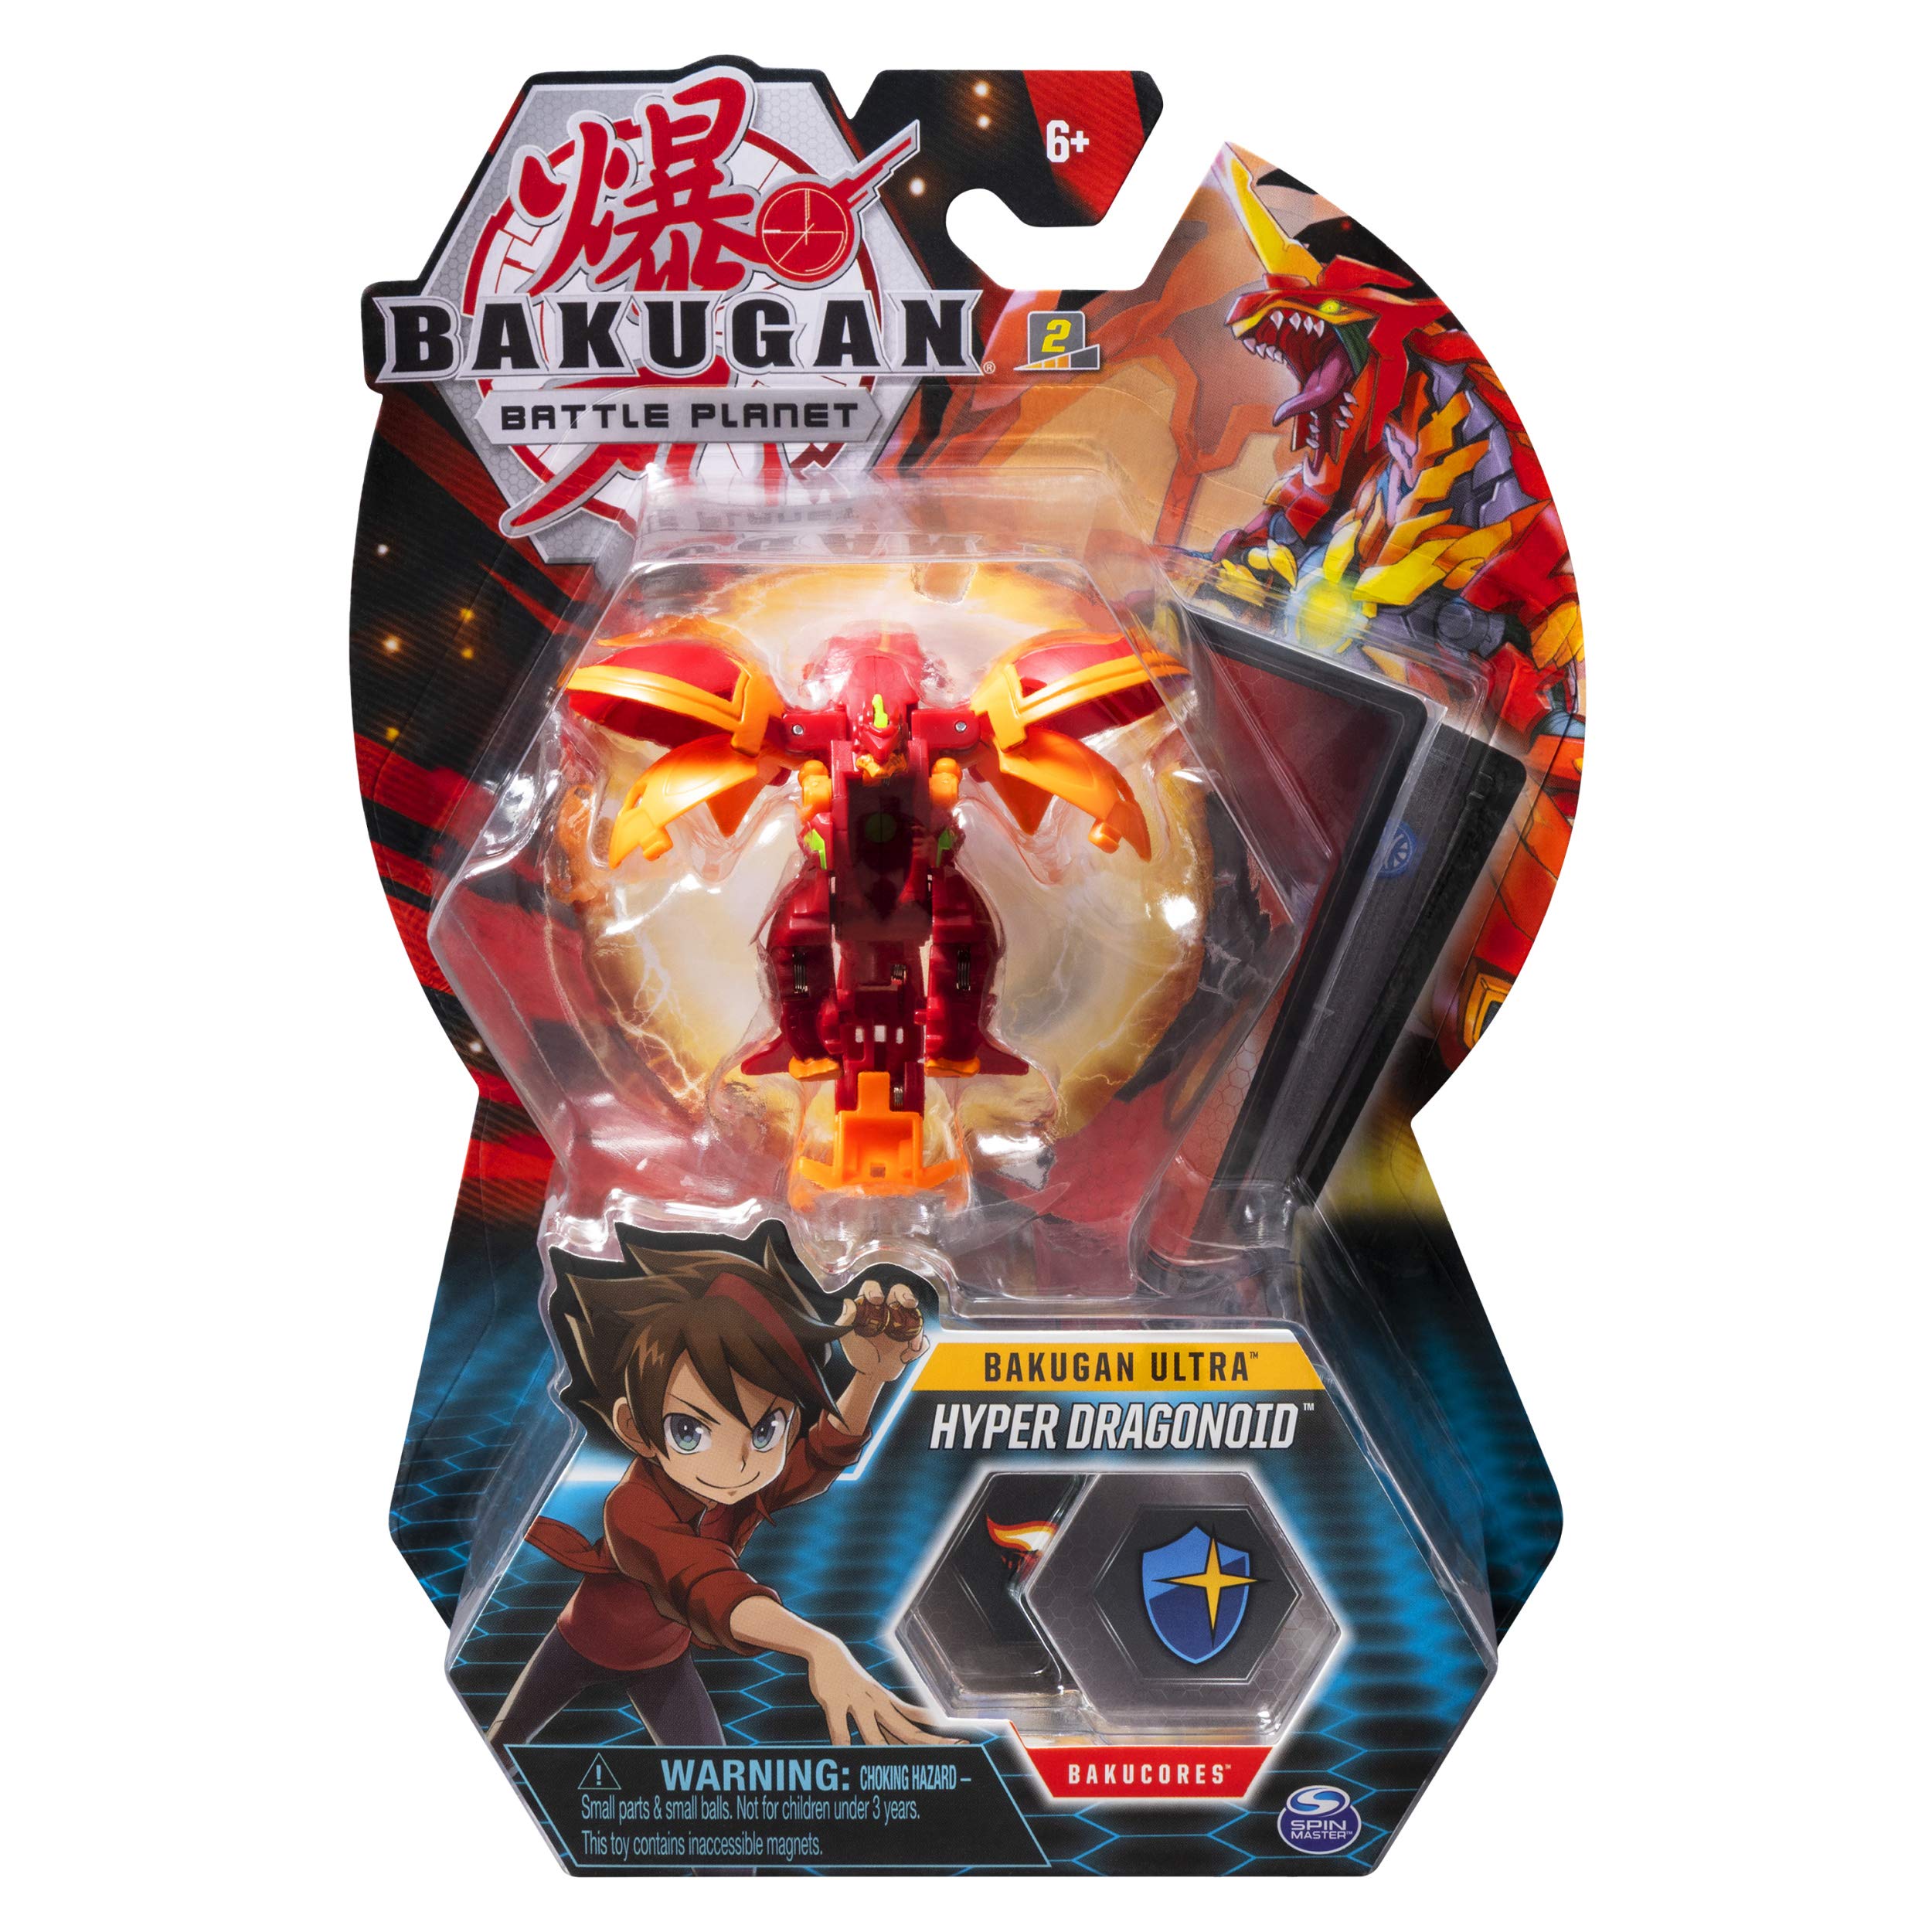 Bakugan Ultra, Hyper Dragonoid, 3-inch Tall Collectible Transforming Creature, for Ages 6 and Up